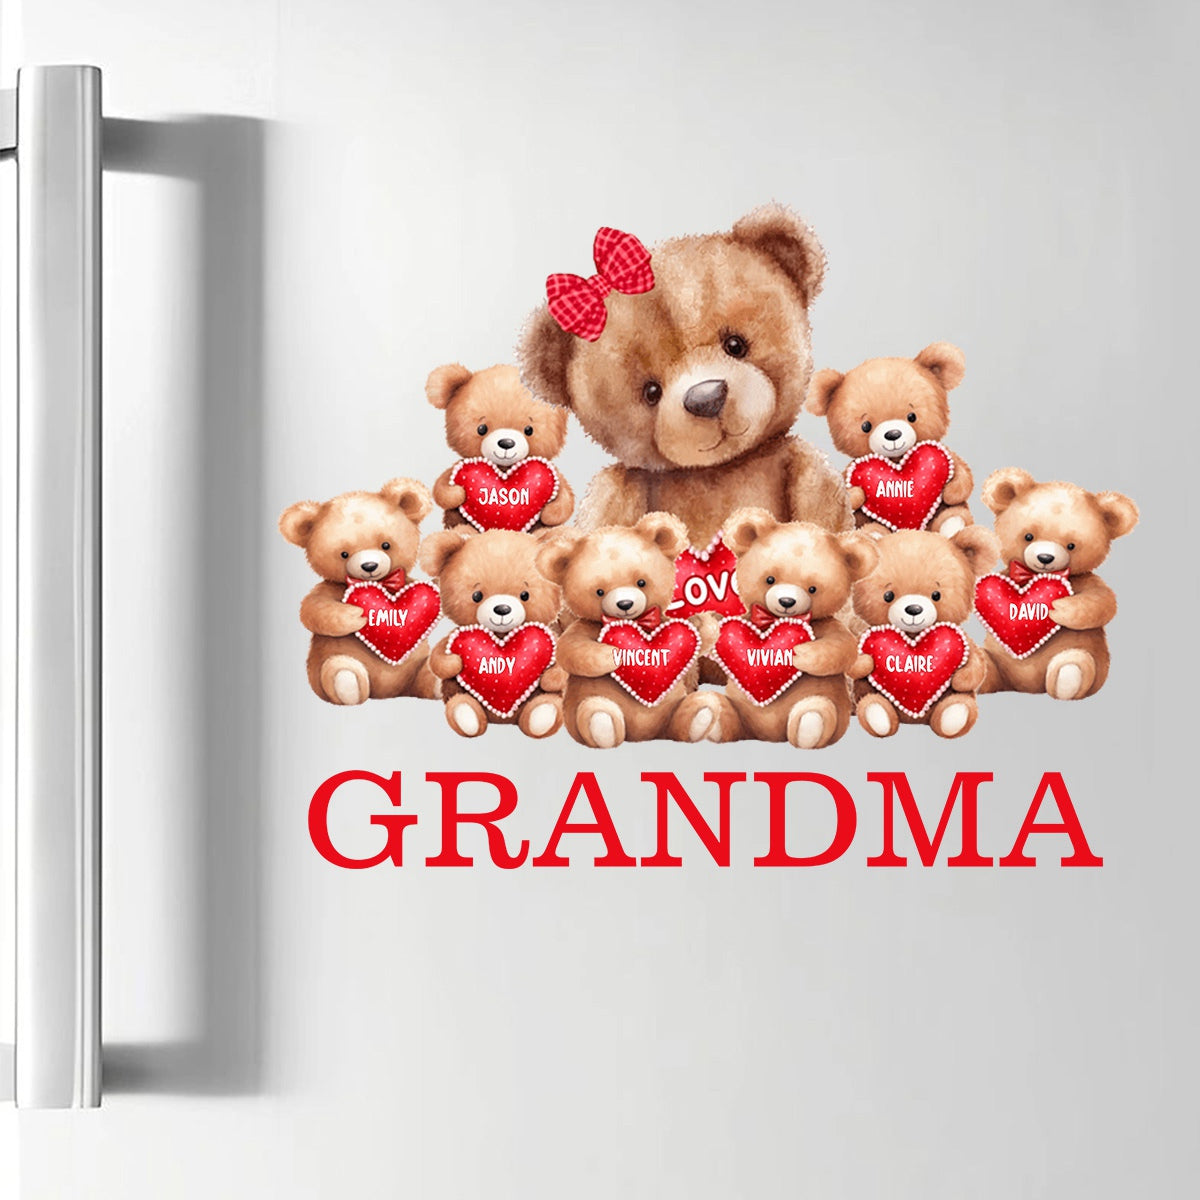 Personalized Bear With Cute Little Bear Kids Decal Gift For Mom/Grandma